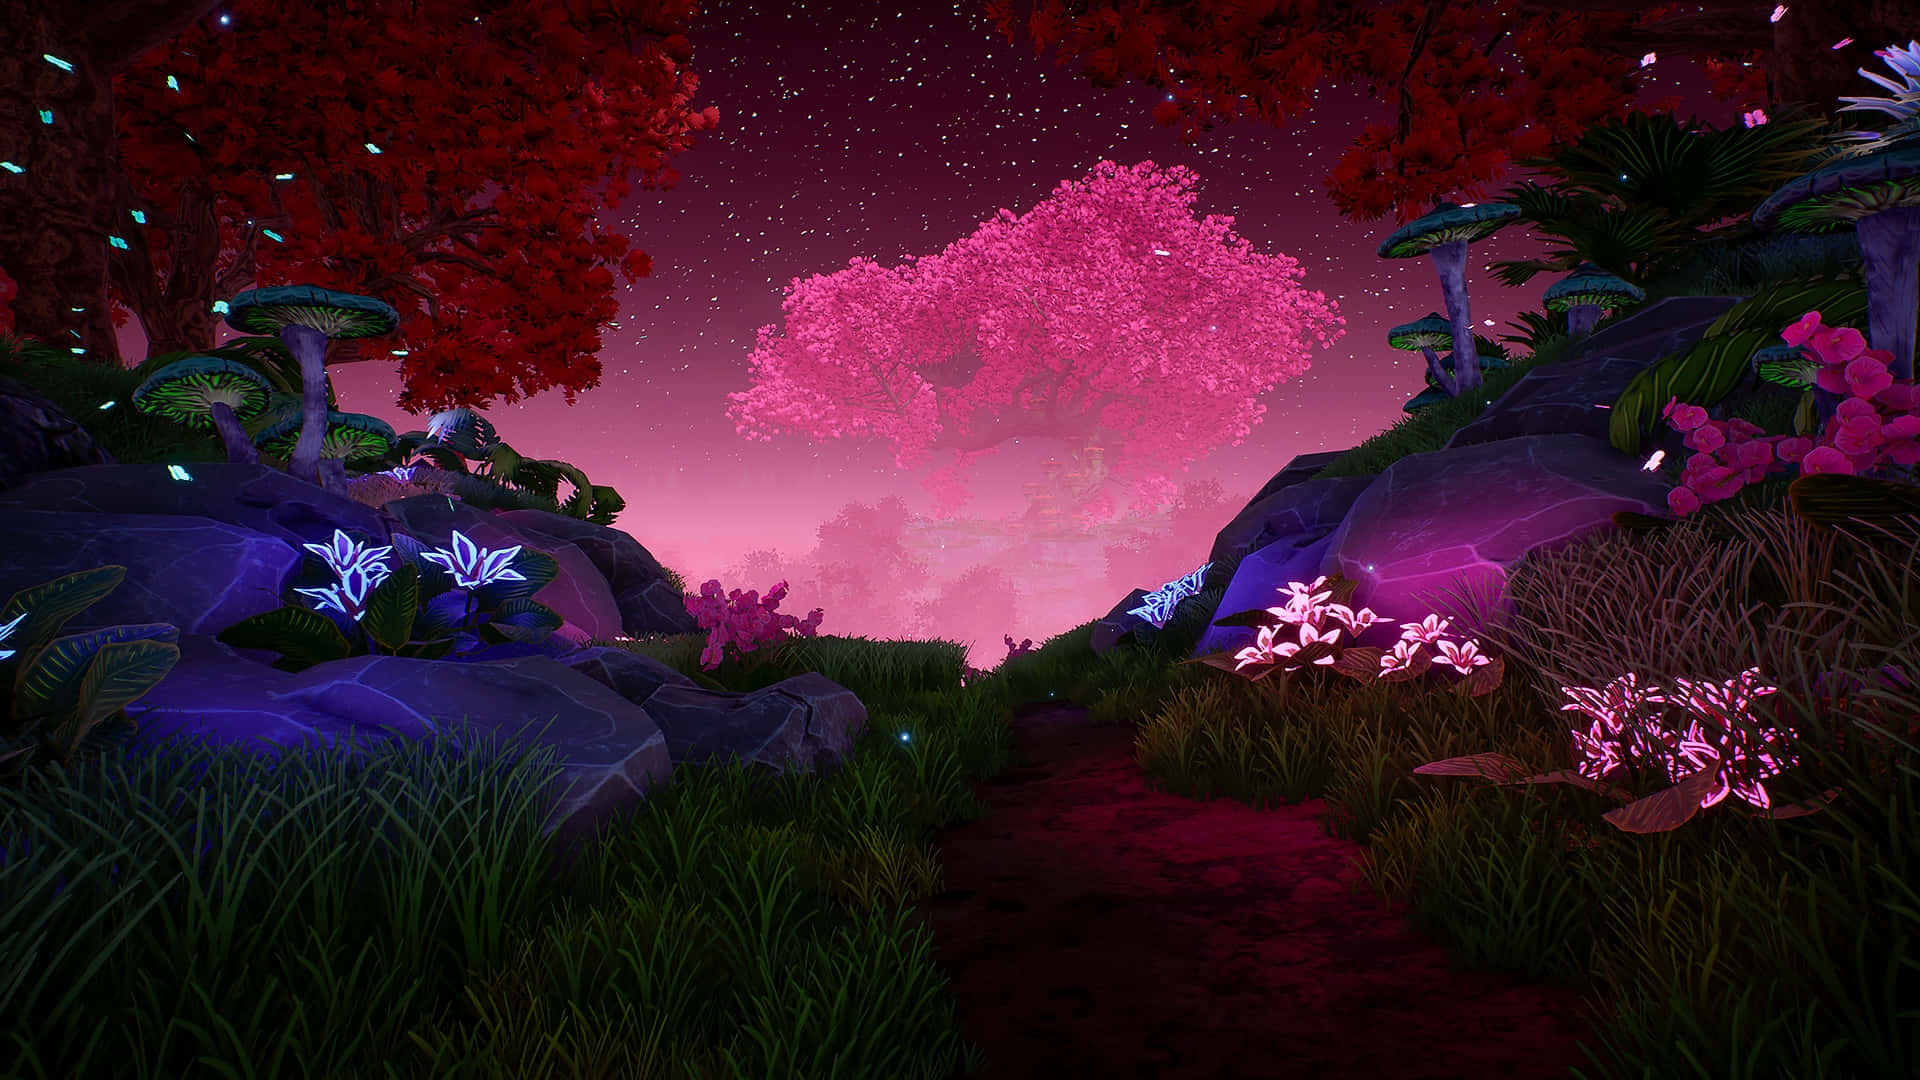 a night scene with pink plants and trees